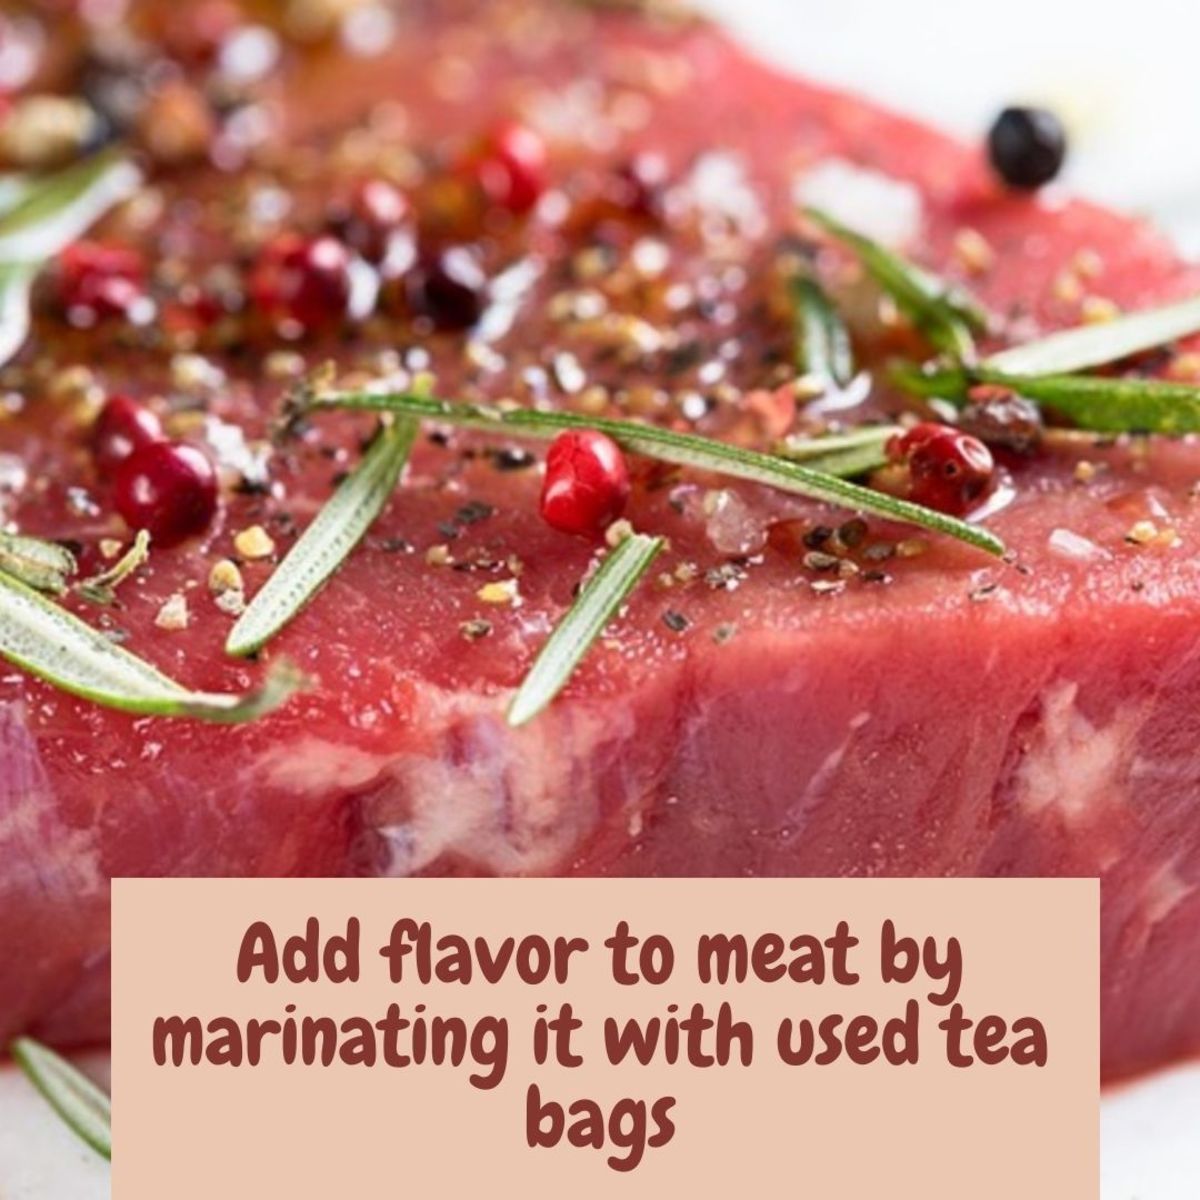 Make a deliciously tender meat dish by incorporating tea into the marinade.